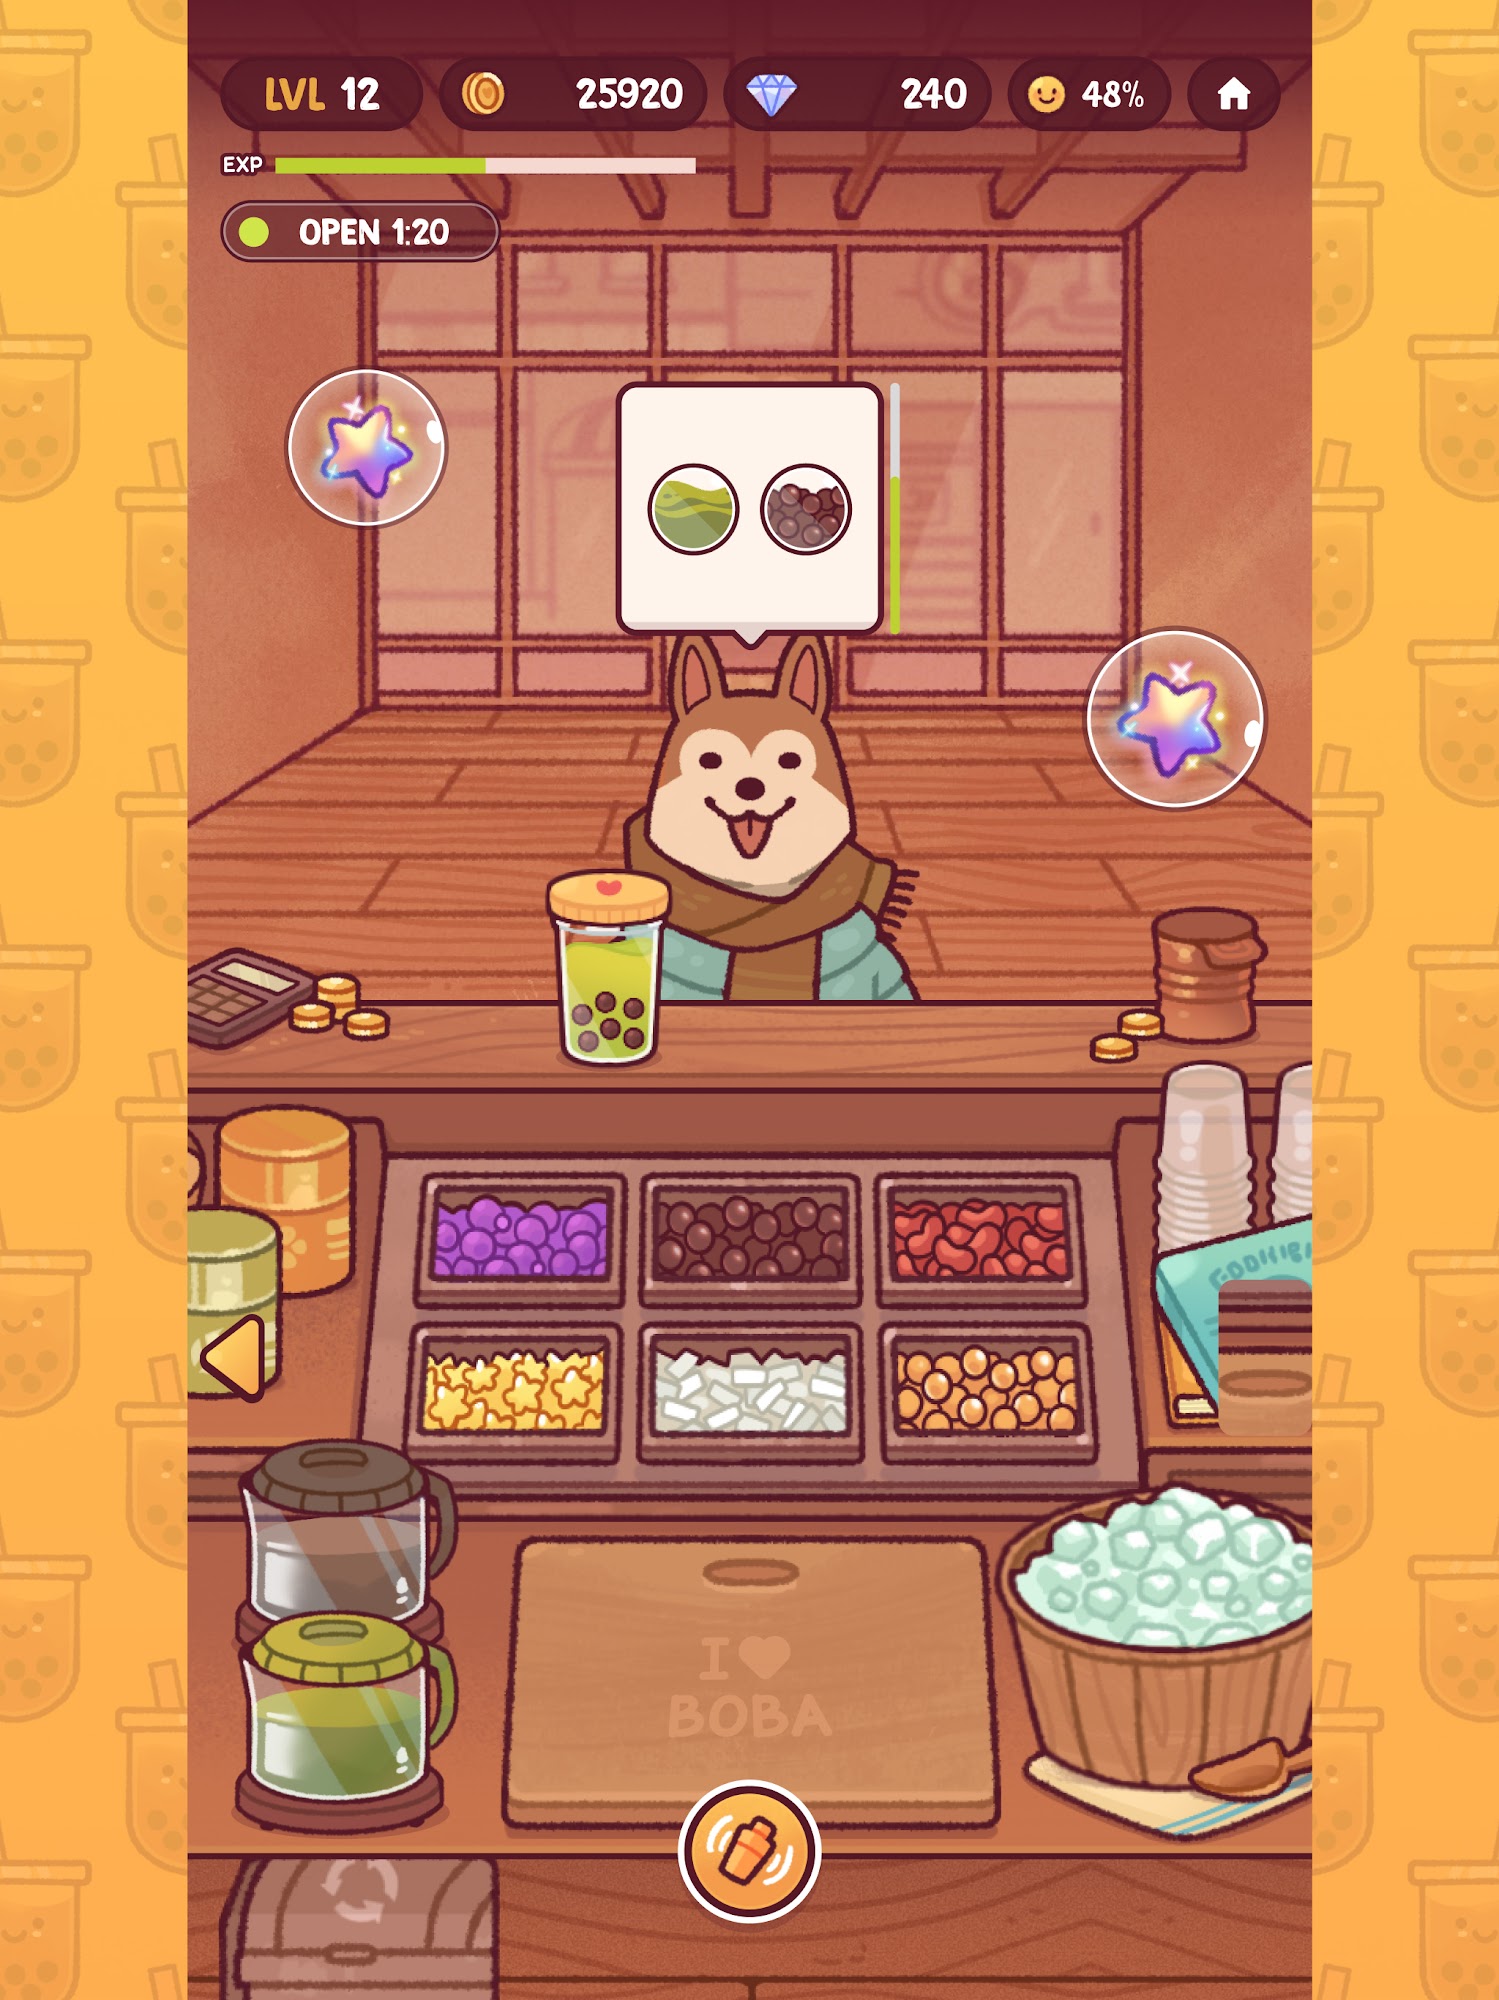 Download Boba Tale Android free game.